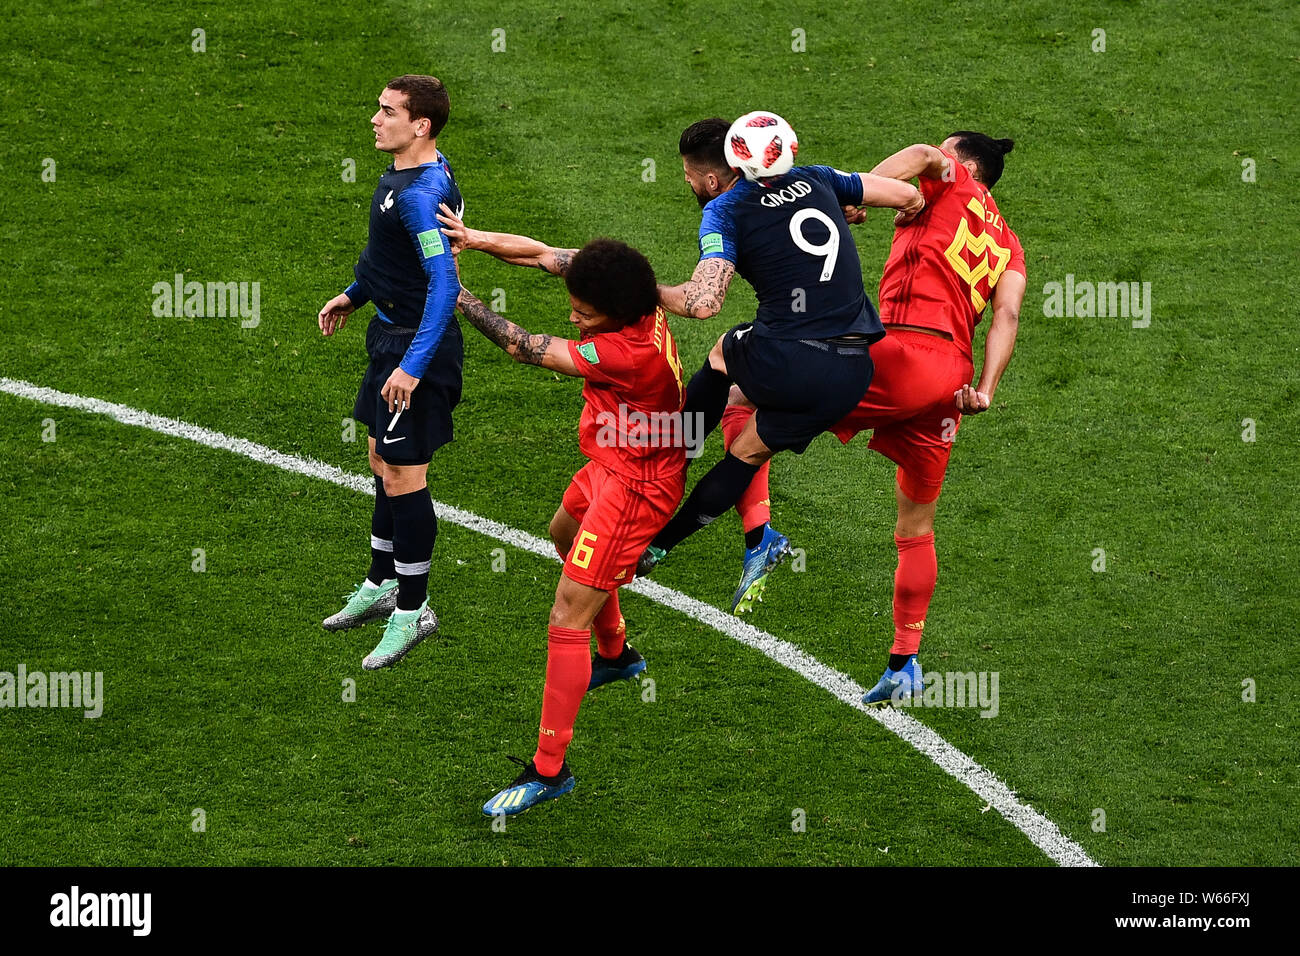 Nacer Chadli, right, and Axel Witsel, second left, of Belgium challenge Antoine Griezmann, left, and Olivier Giroud of France in their semifinal match Stock Photo